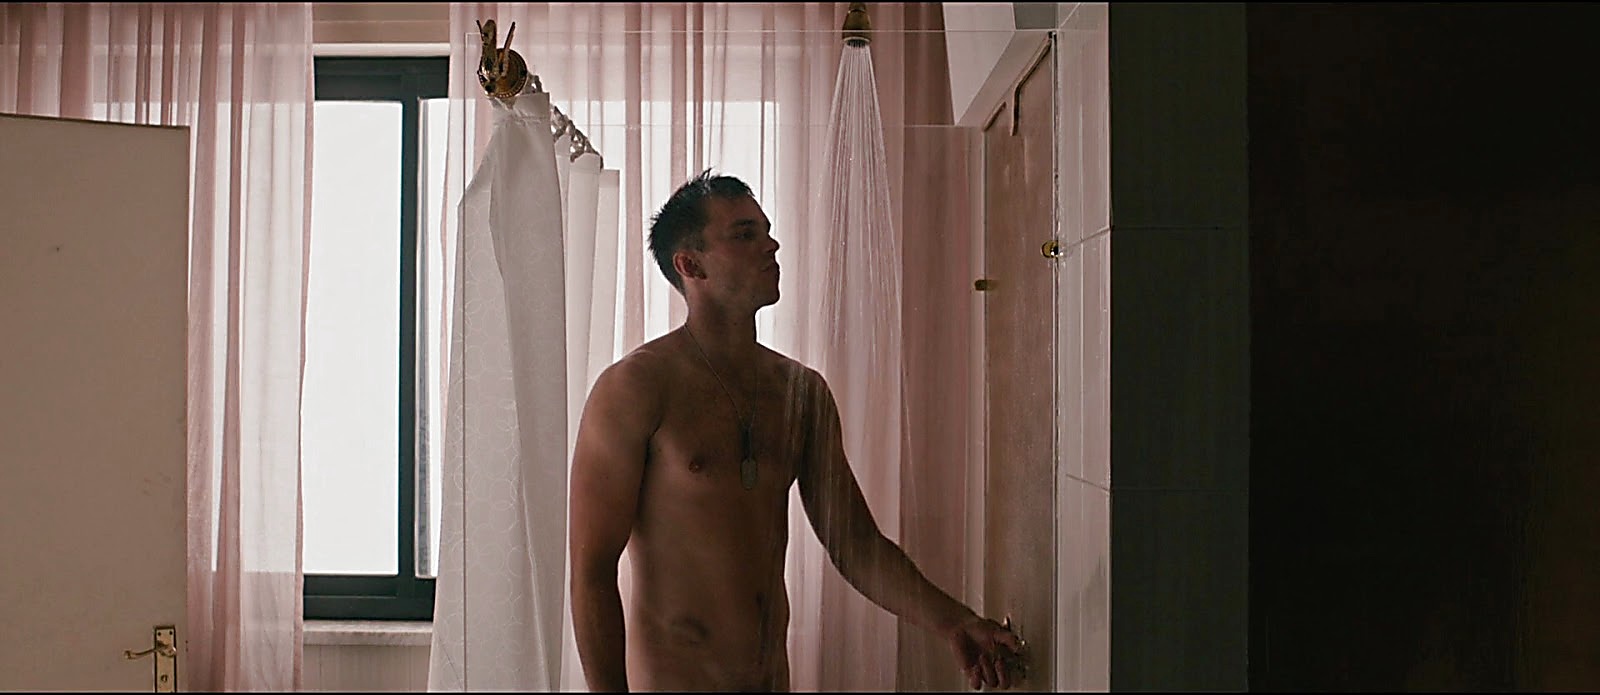 Nicholas Hoult sexy shirtless scene April 22, 2017, 1pm